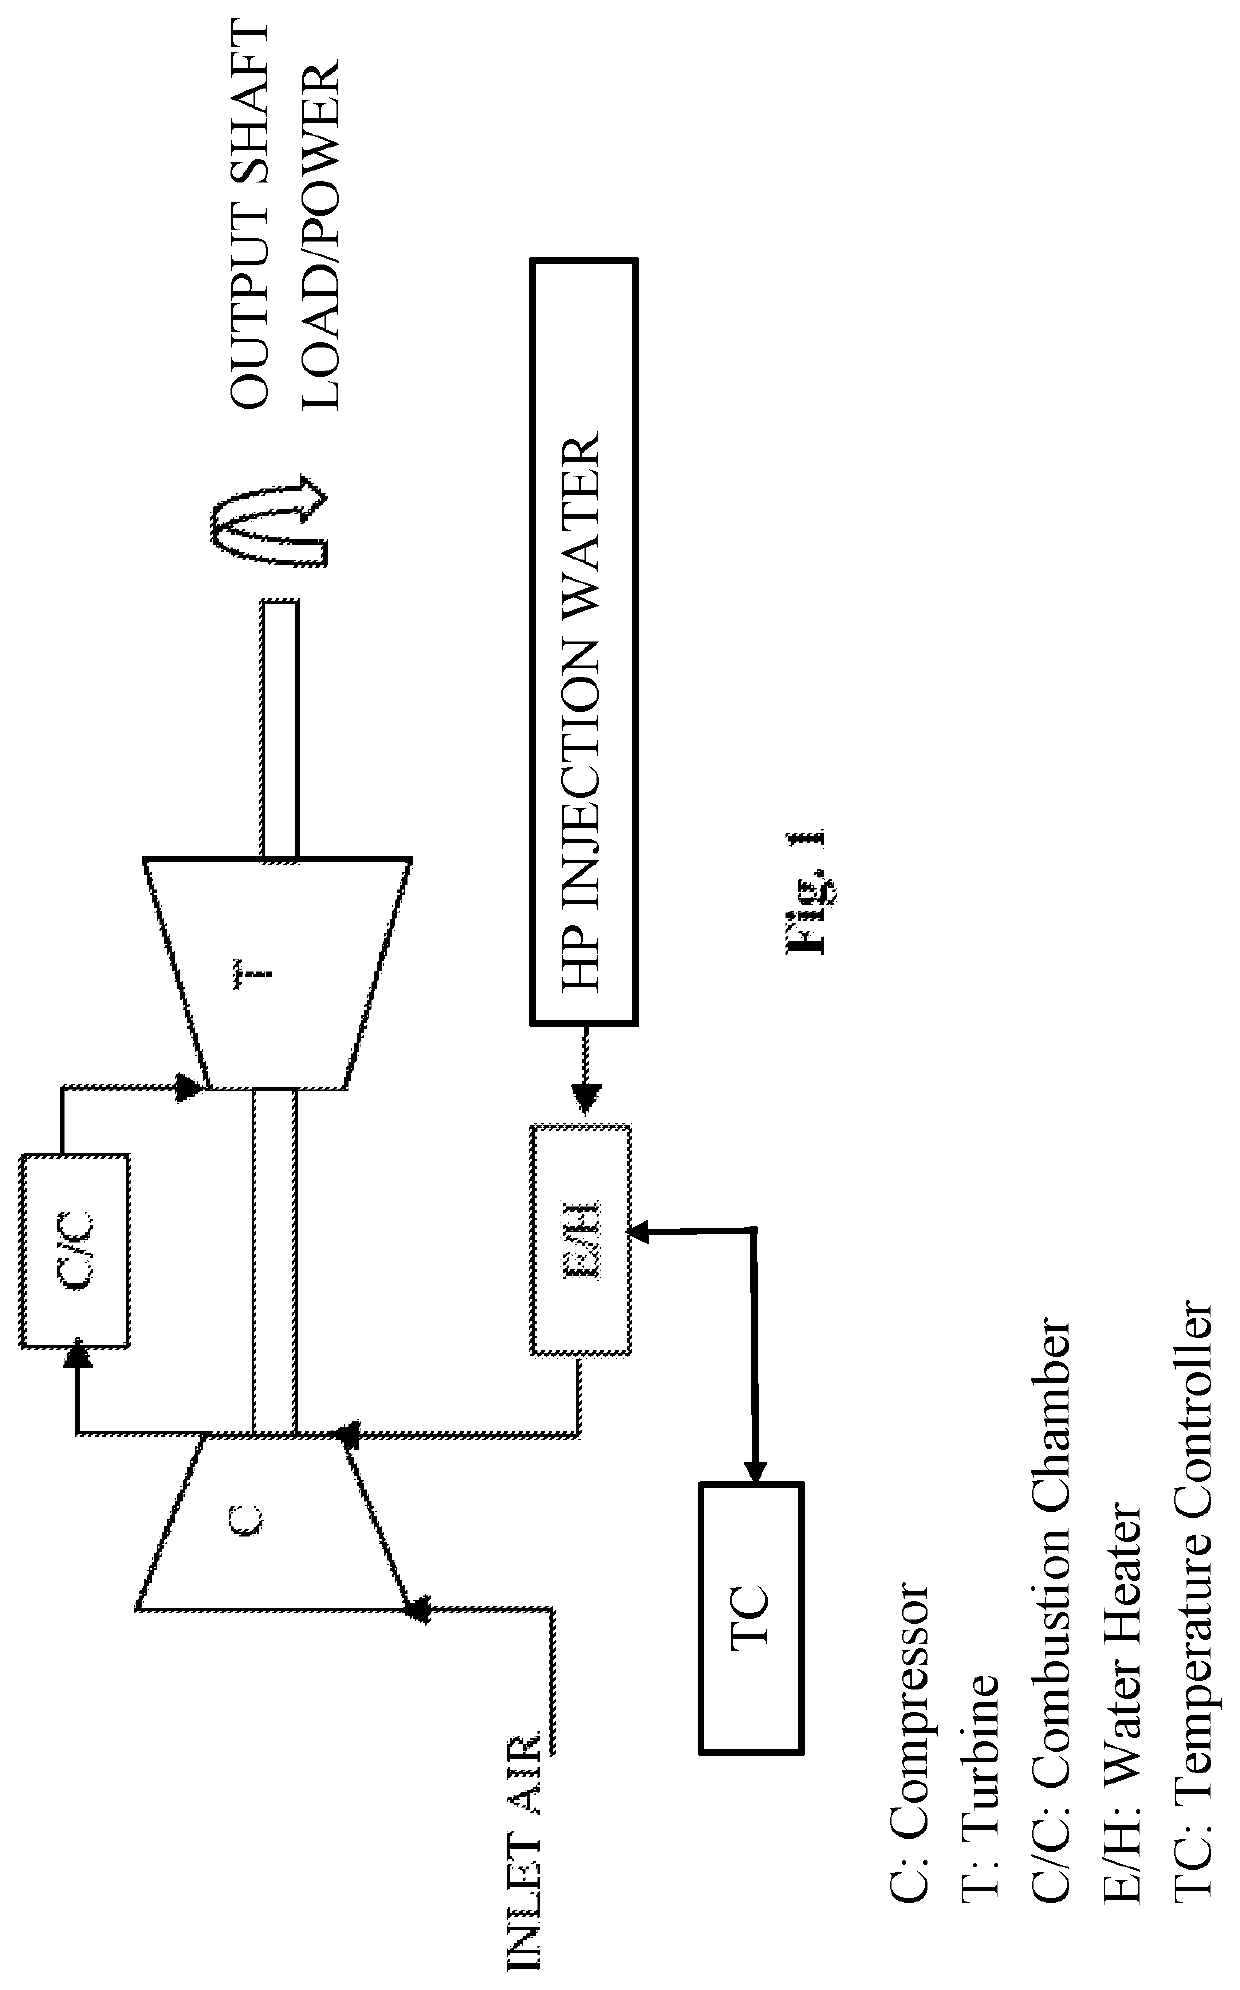 Reducing the load consumed by gas turbine compressor and maximizing turbine mass flow